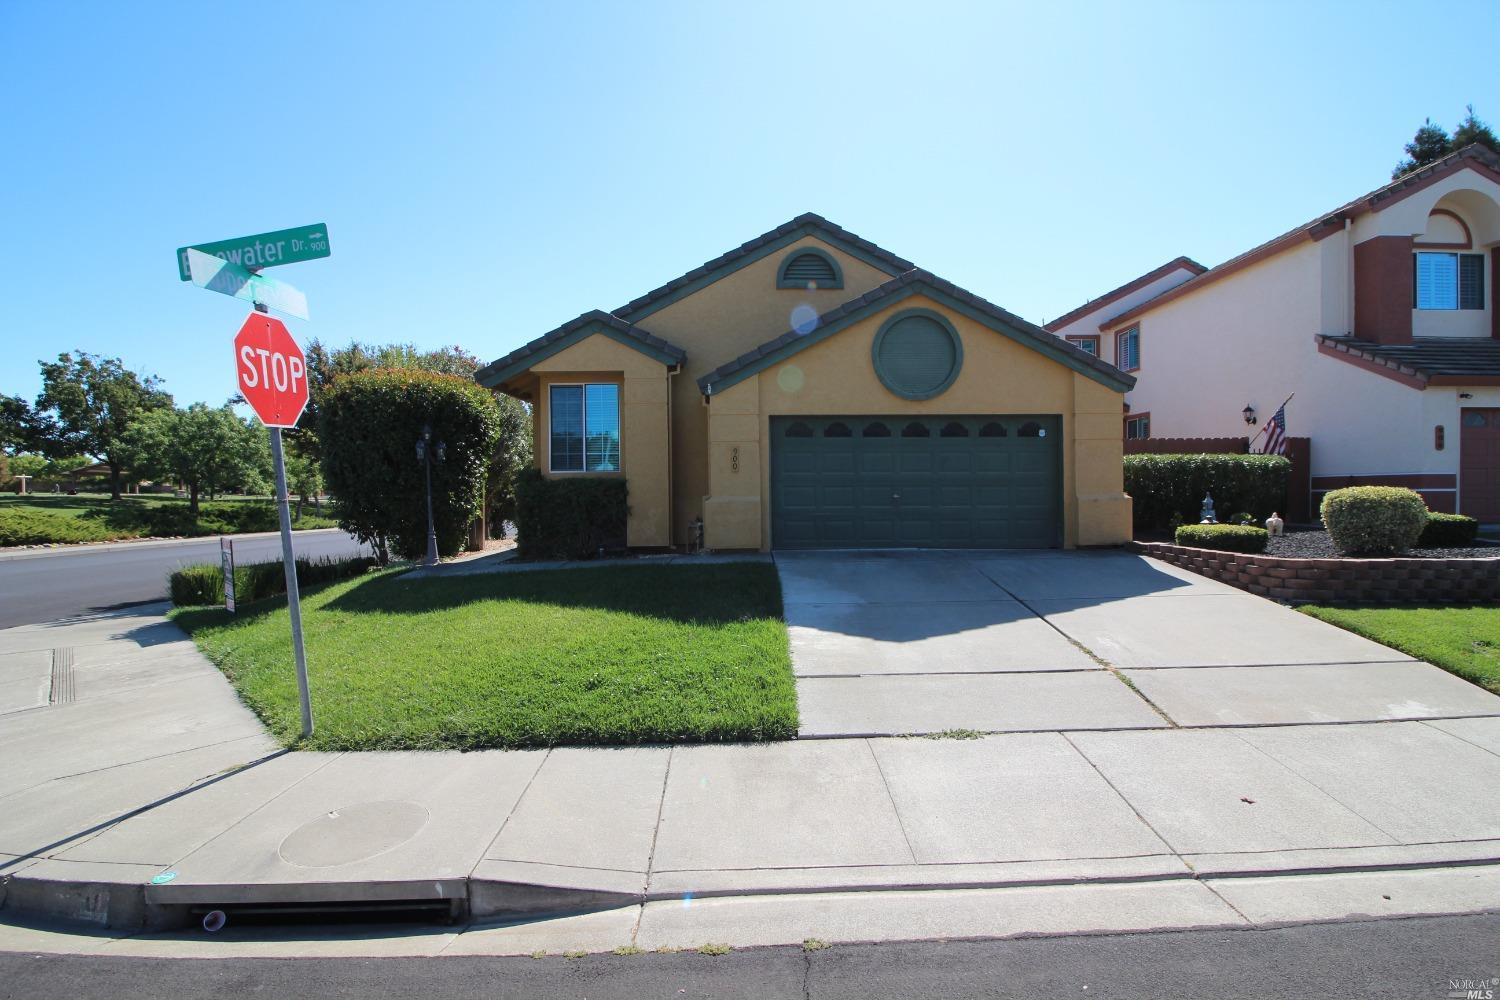 Photo of 900 Bluewater Dr in Vacaville, CA